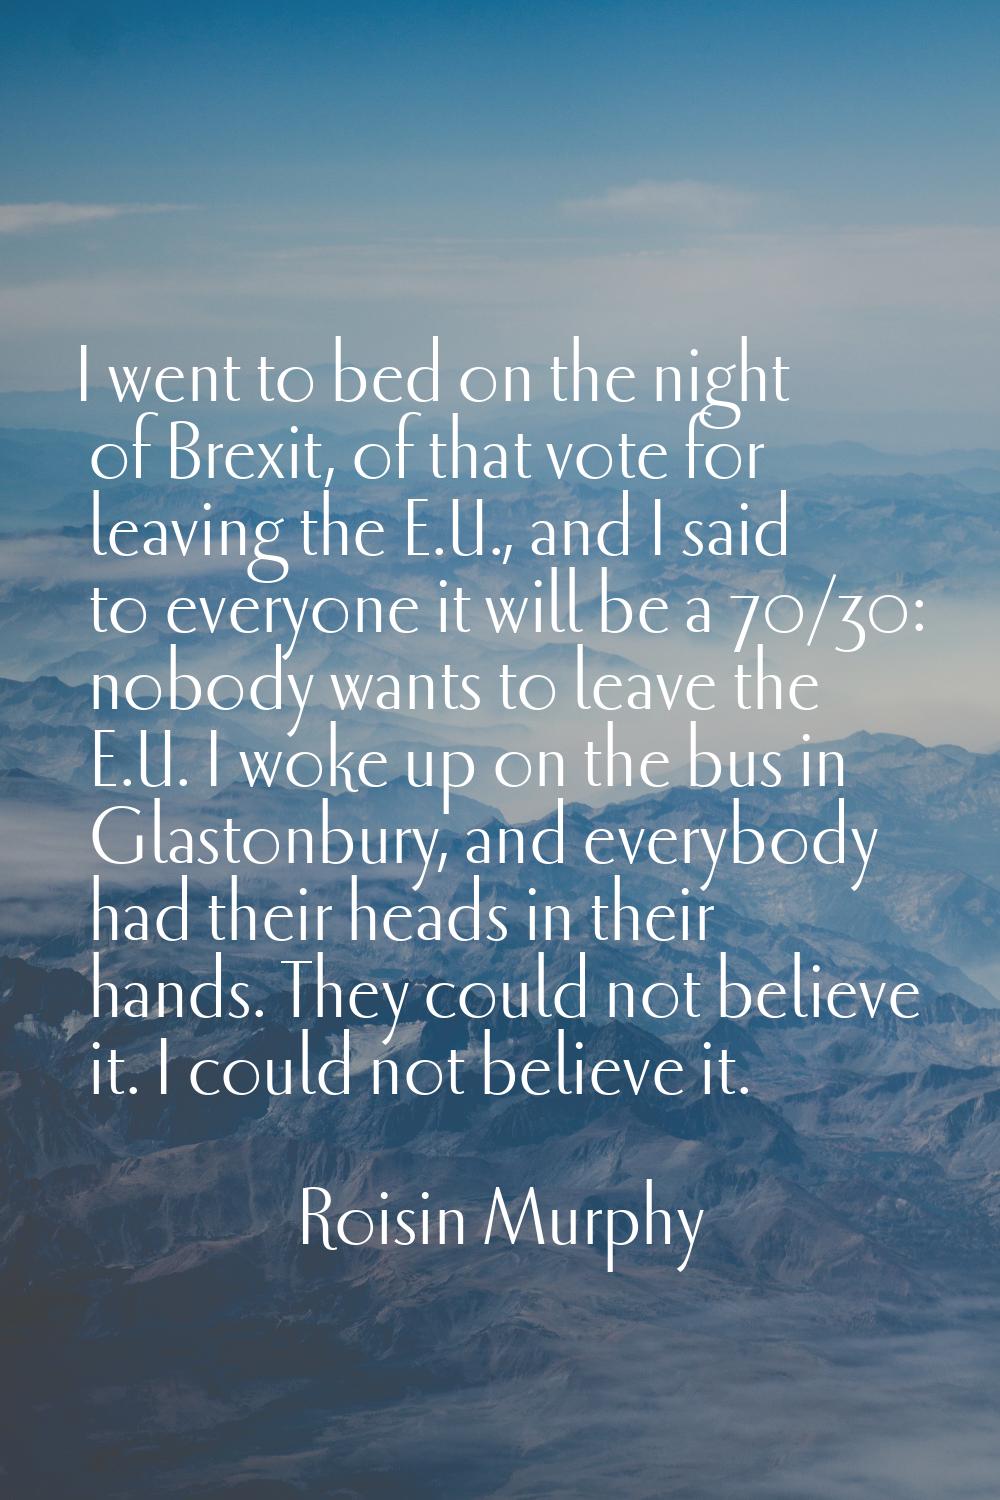 I went to bed on the night of Brexit, of that vote for leaving the E.U., and I said to everyone it 